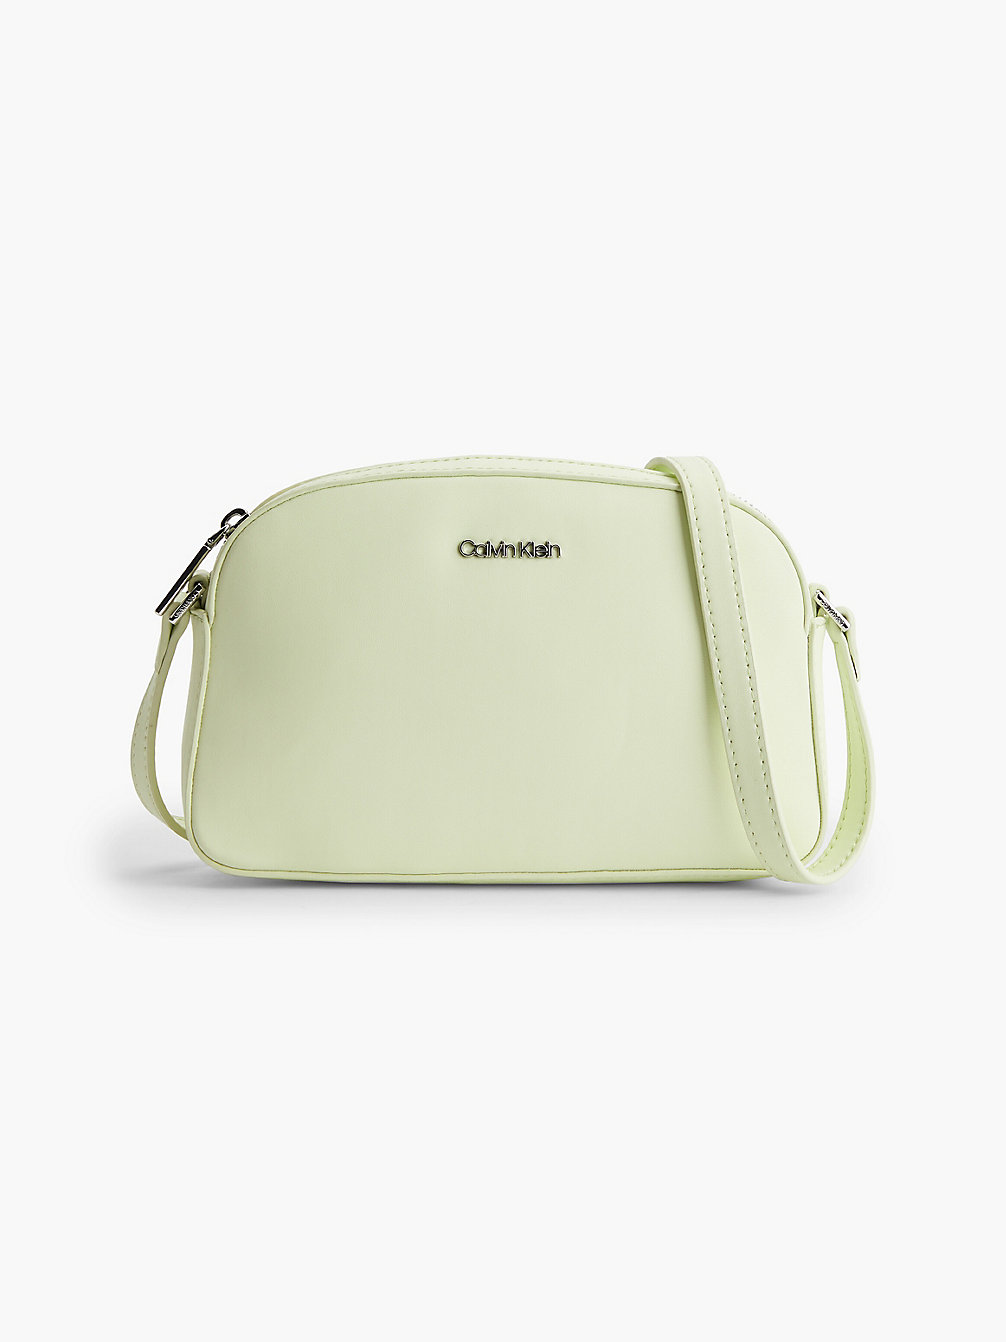 SOFT LIME Recycled Crossbody Bag undefined women Calvin Klein